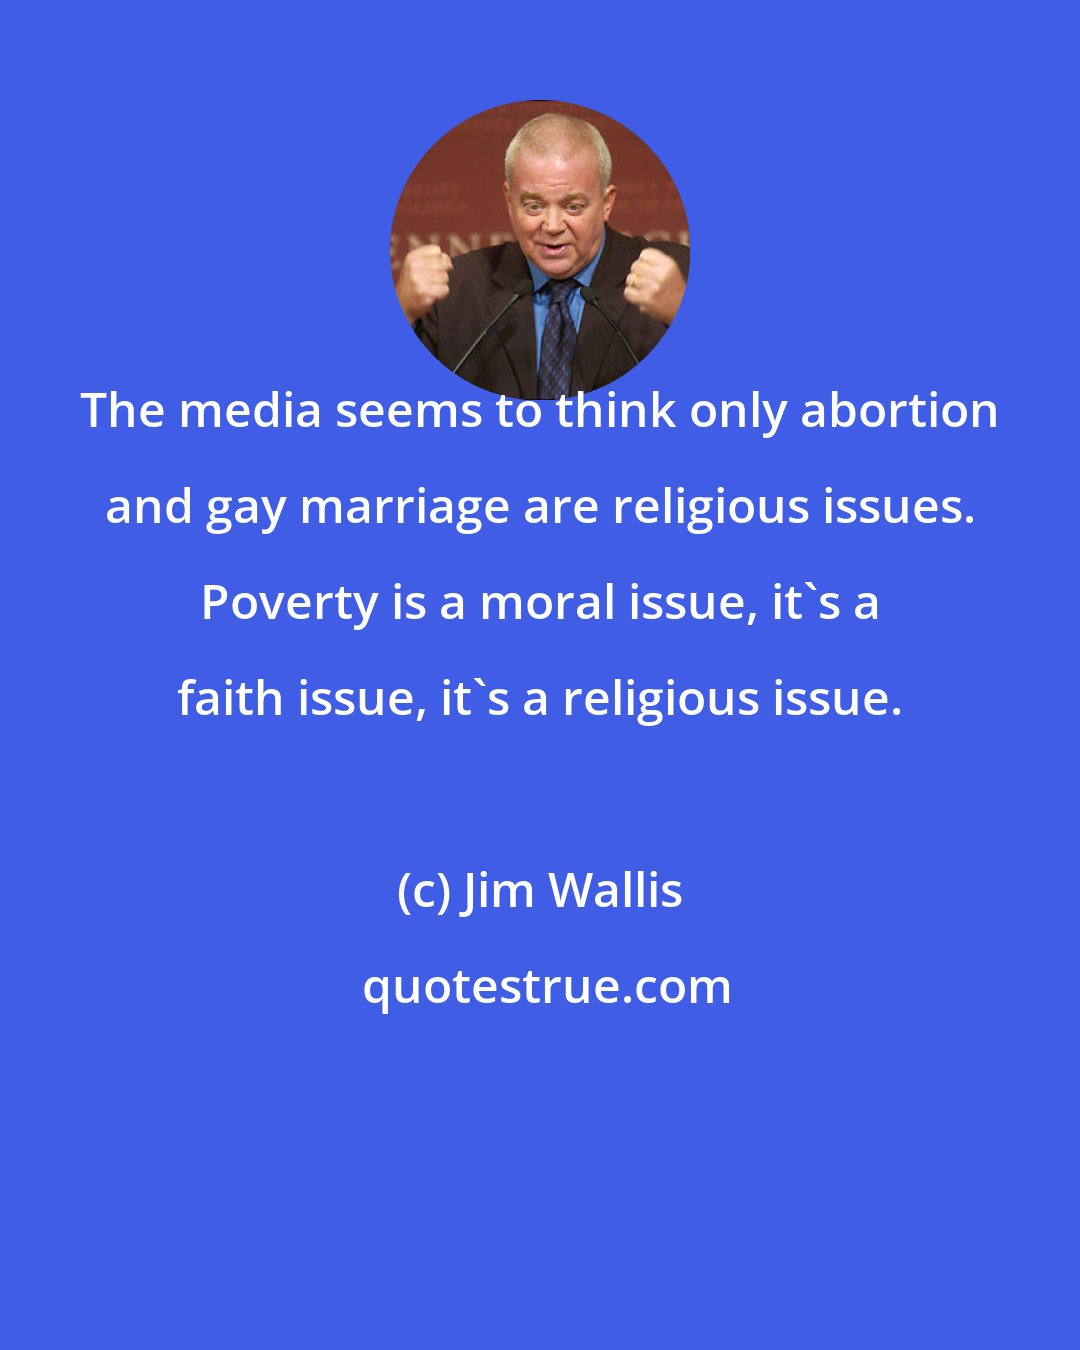 Jim Wallis: The media seems to think only abortion and gay marriage are religious issues. Poverty is a moral issue, it's a faith issue, it's a religious issue.